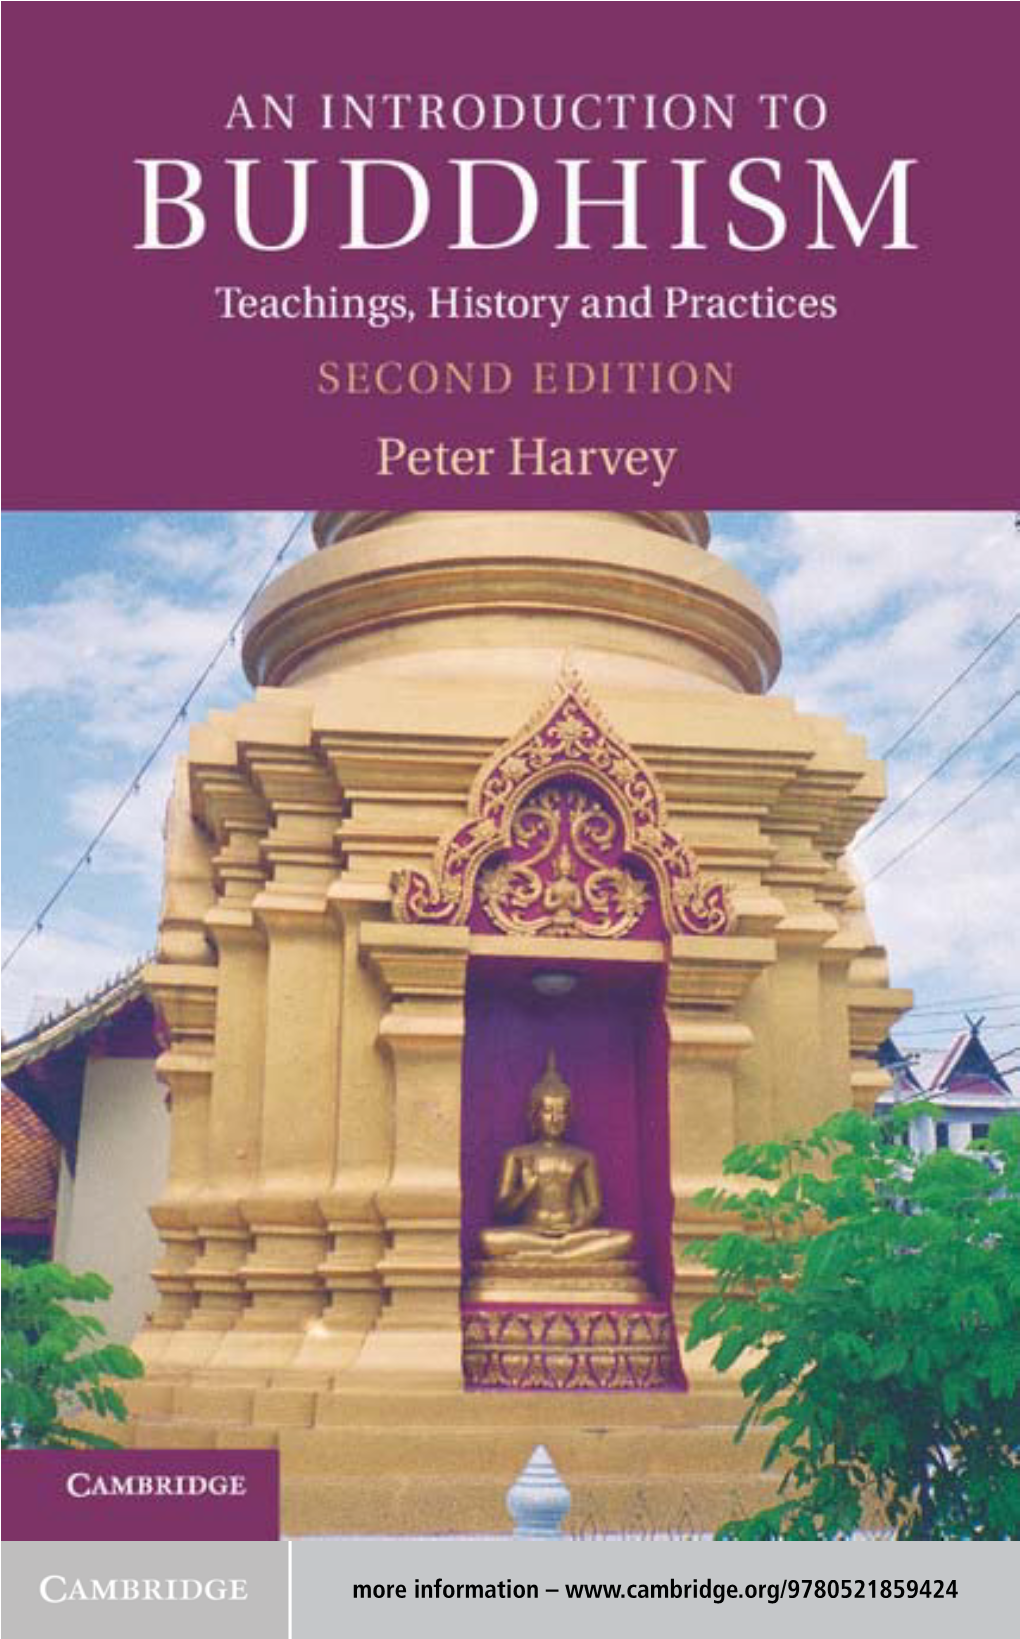 An Introduction to Buddhism: Teachings, History and Practices Gone Back to the Indus Valley Civilization